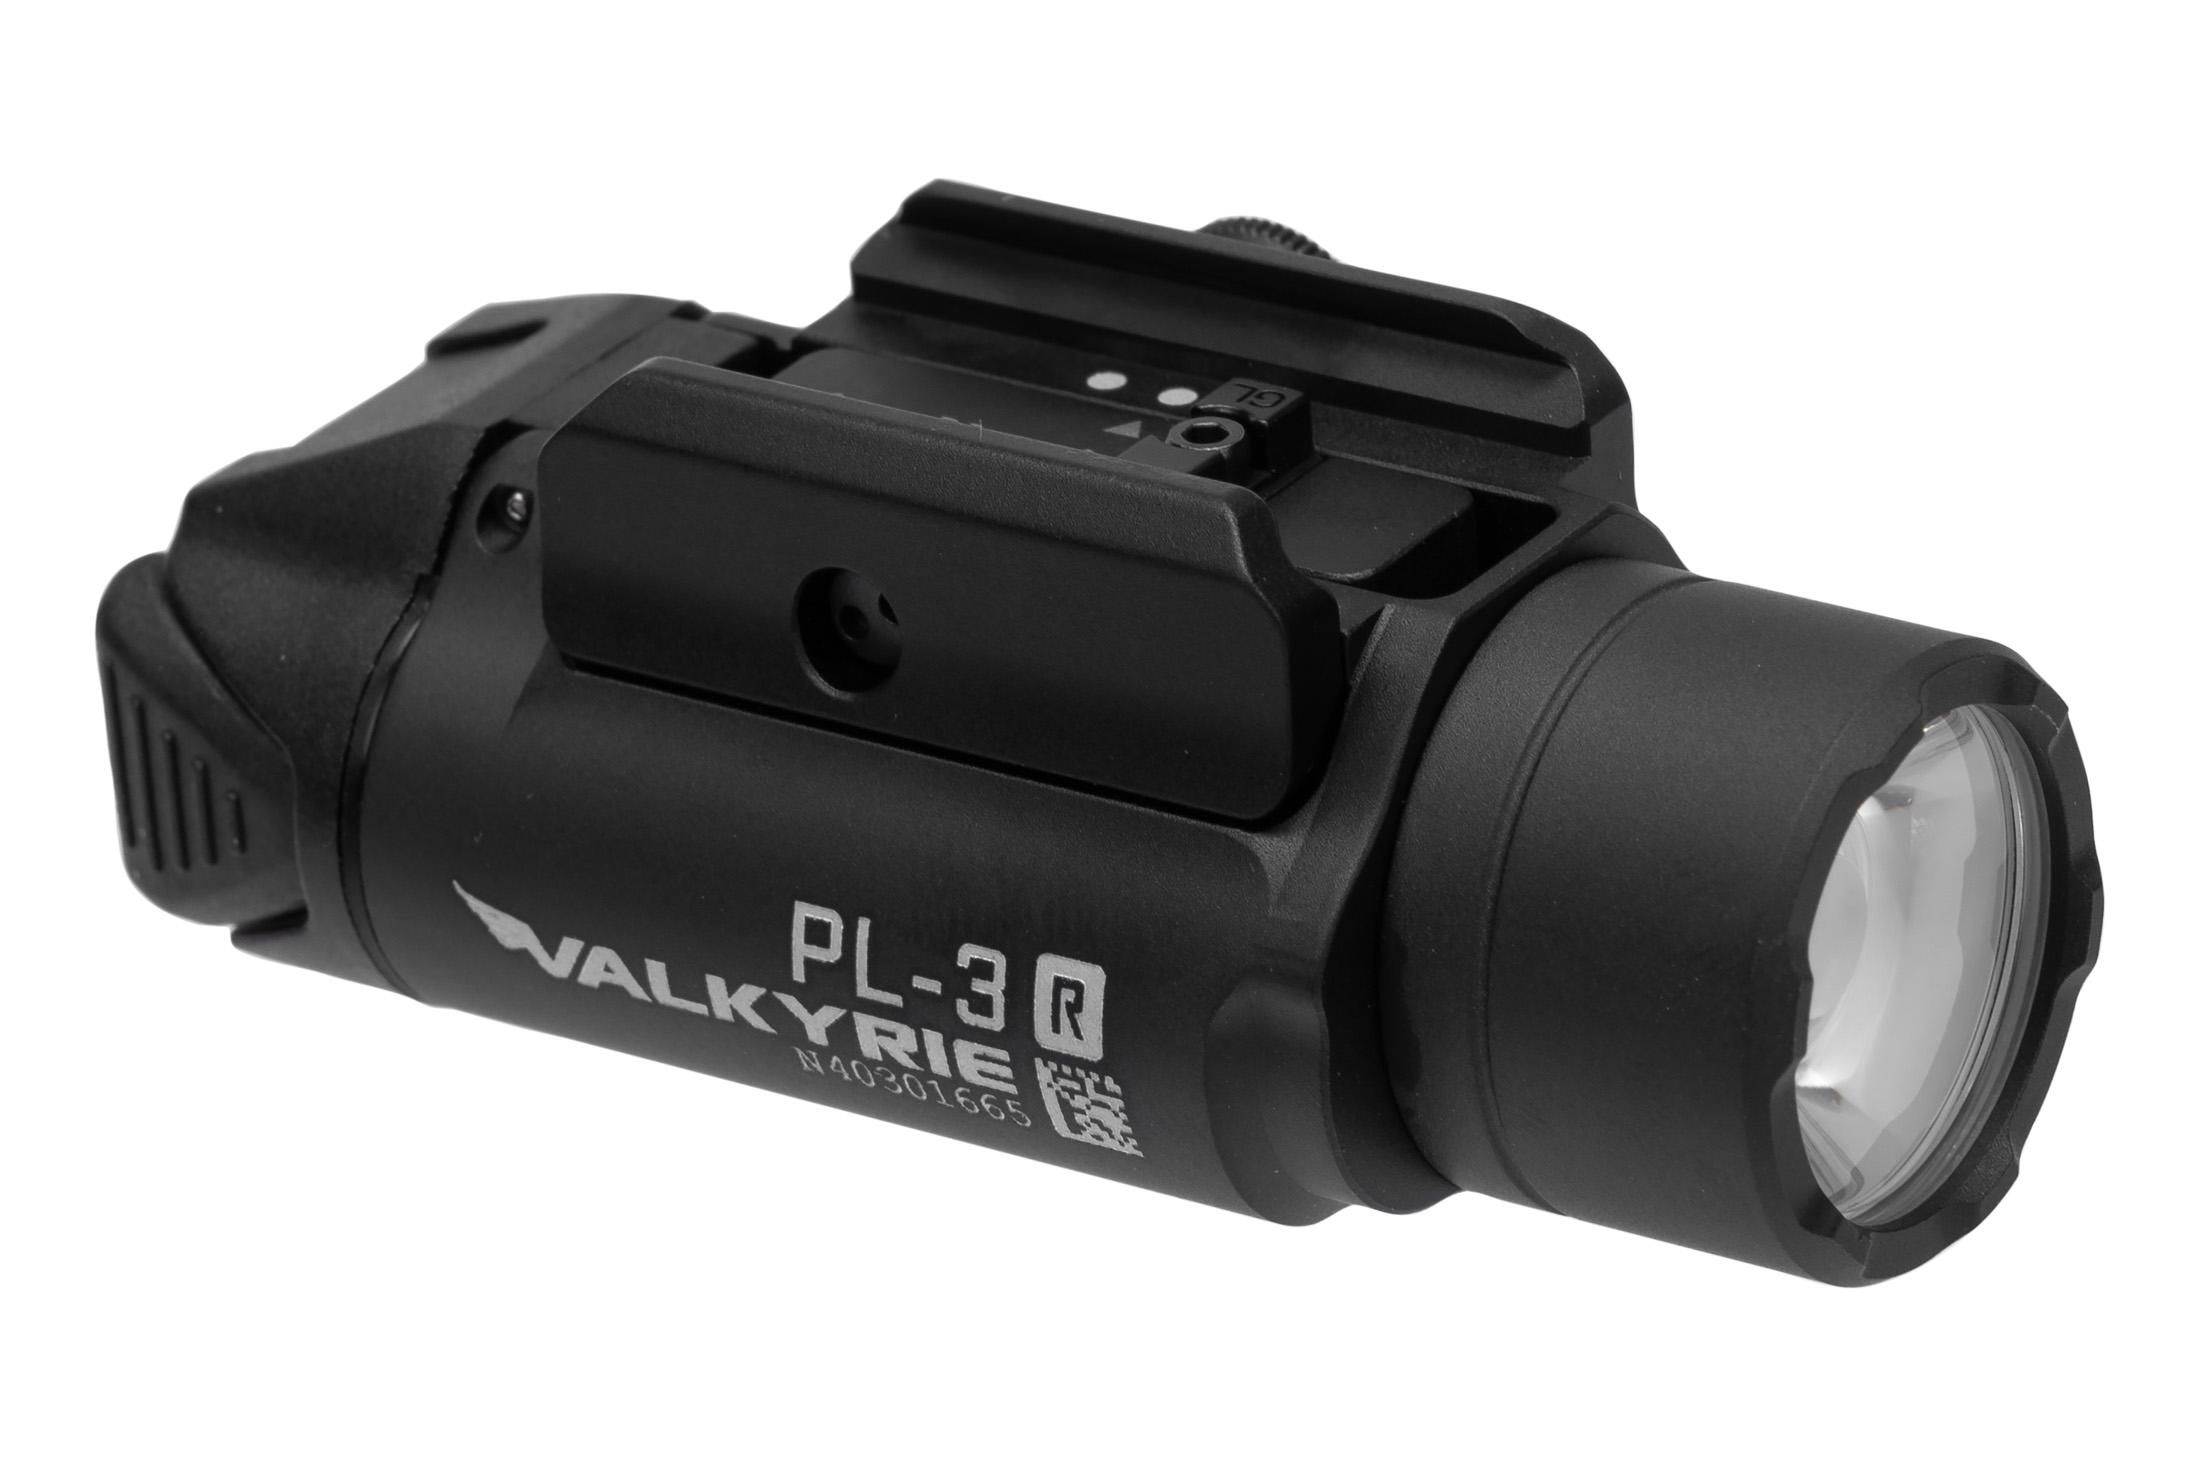 Olight PL-3R Valkyrie 1500 Lumen Rechargeable Mountable Tactical 